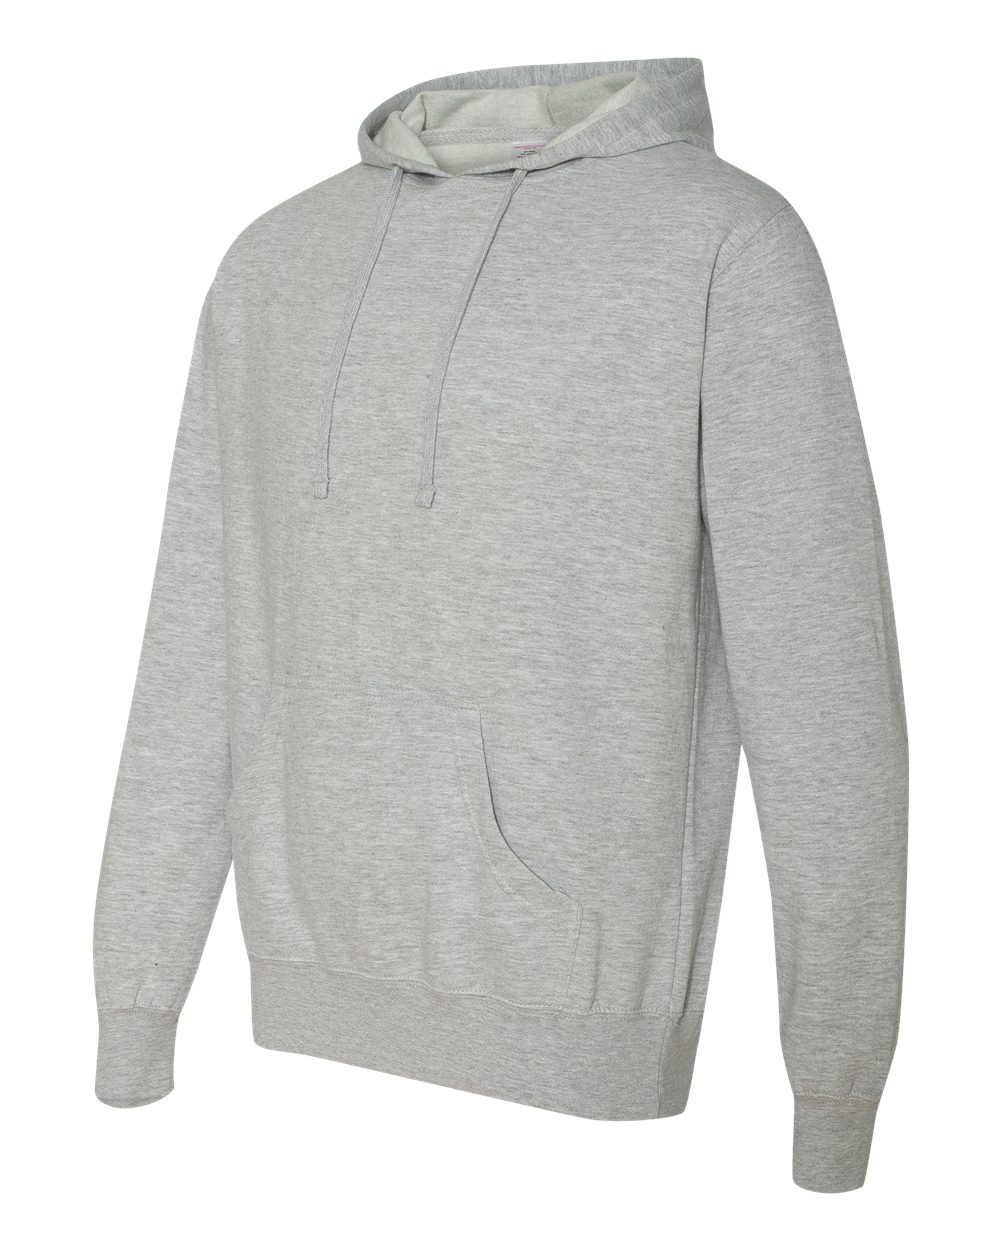 Independent Trading Co. Heavenly Fleece Hooded Pullover - SS2200